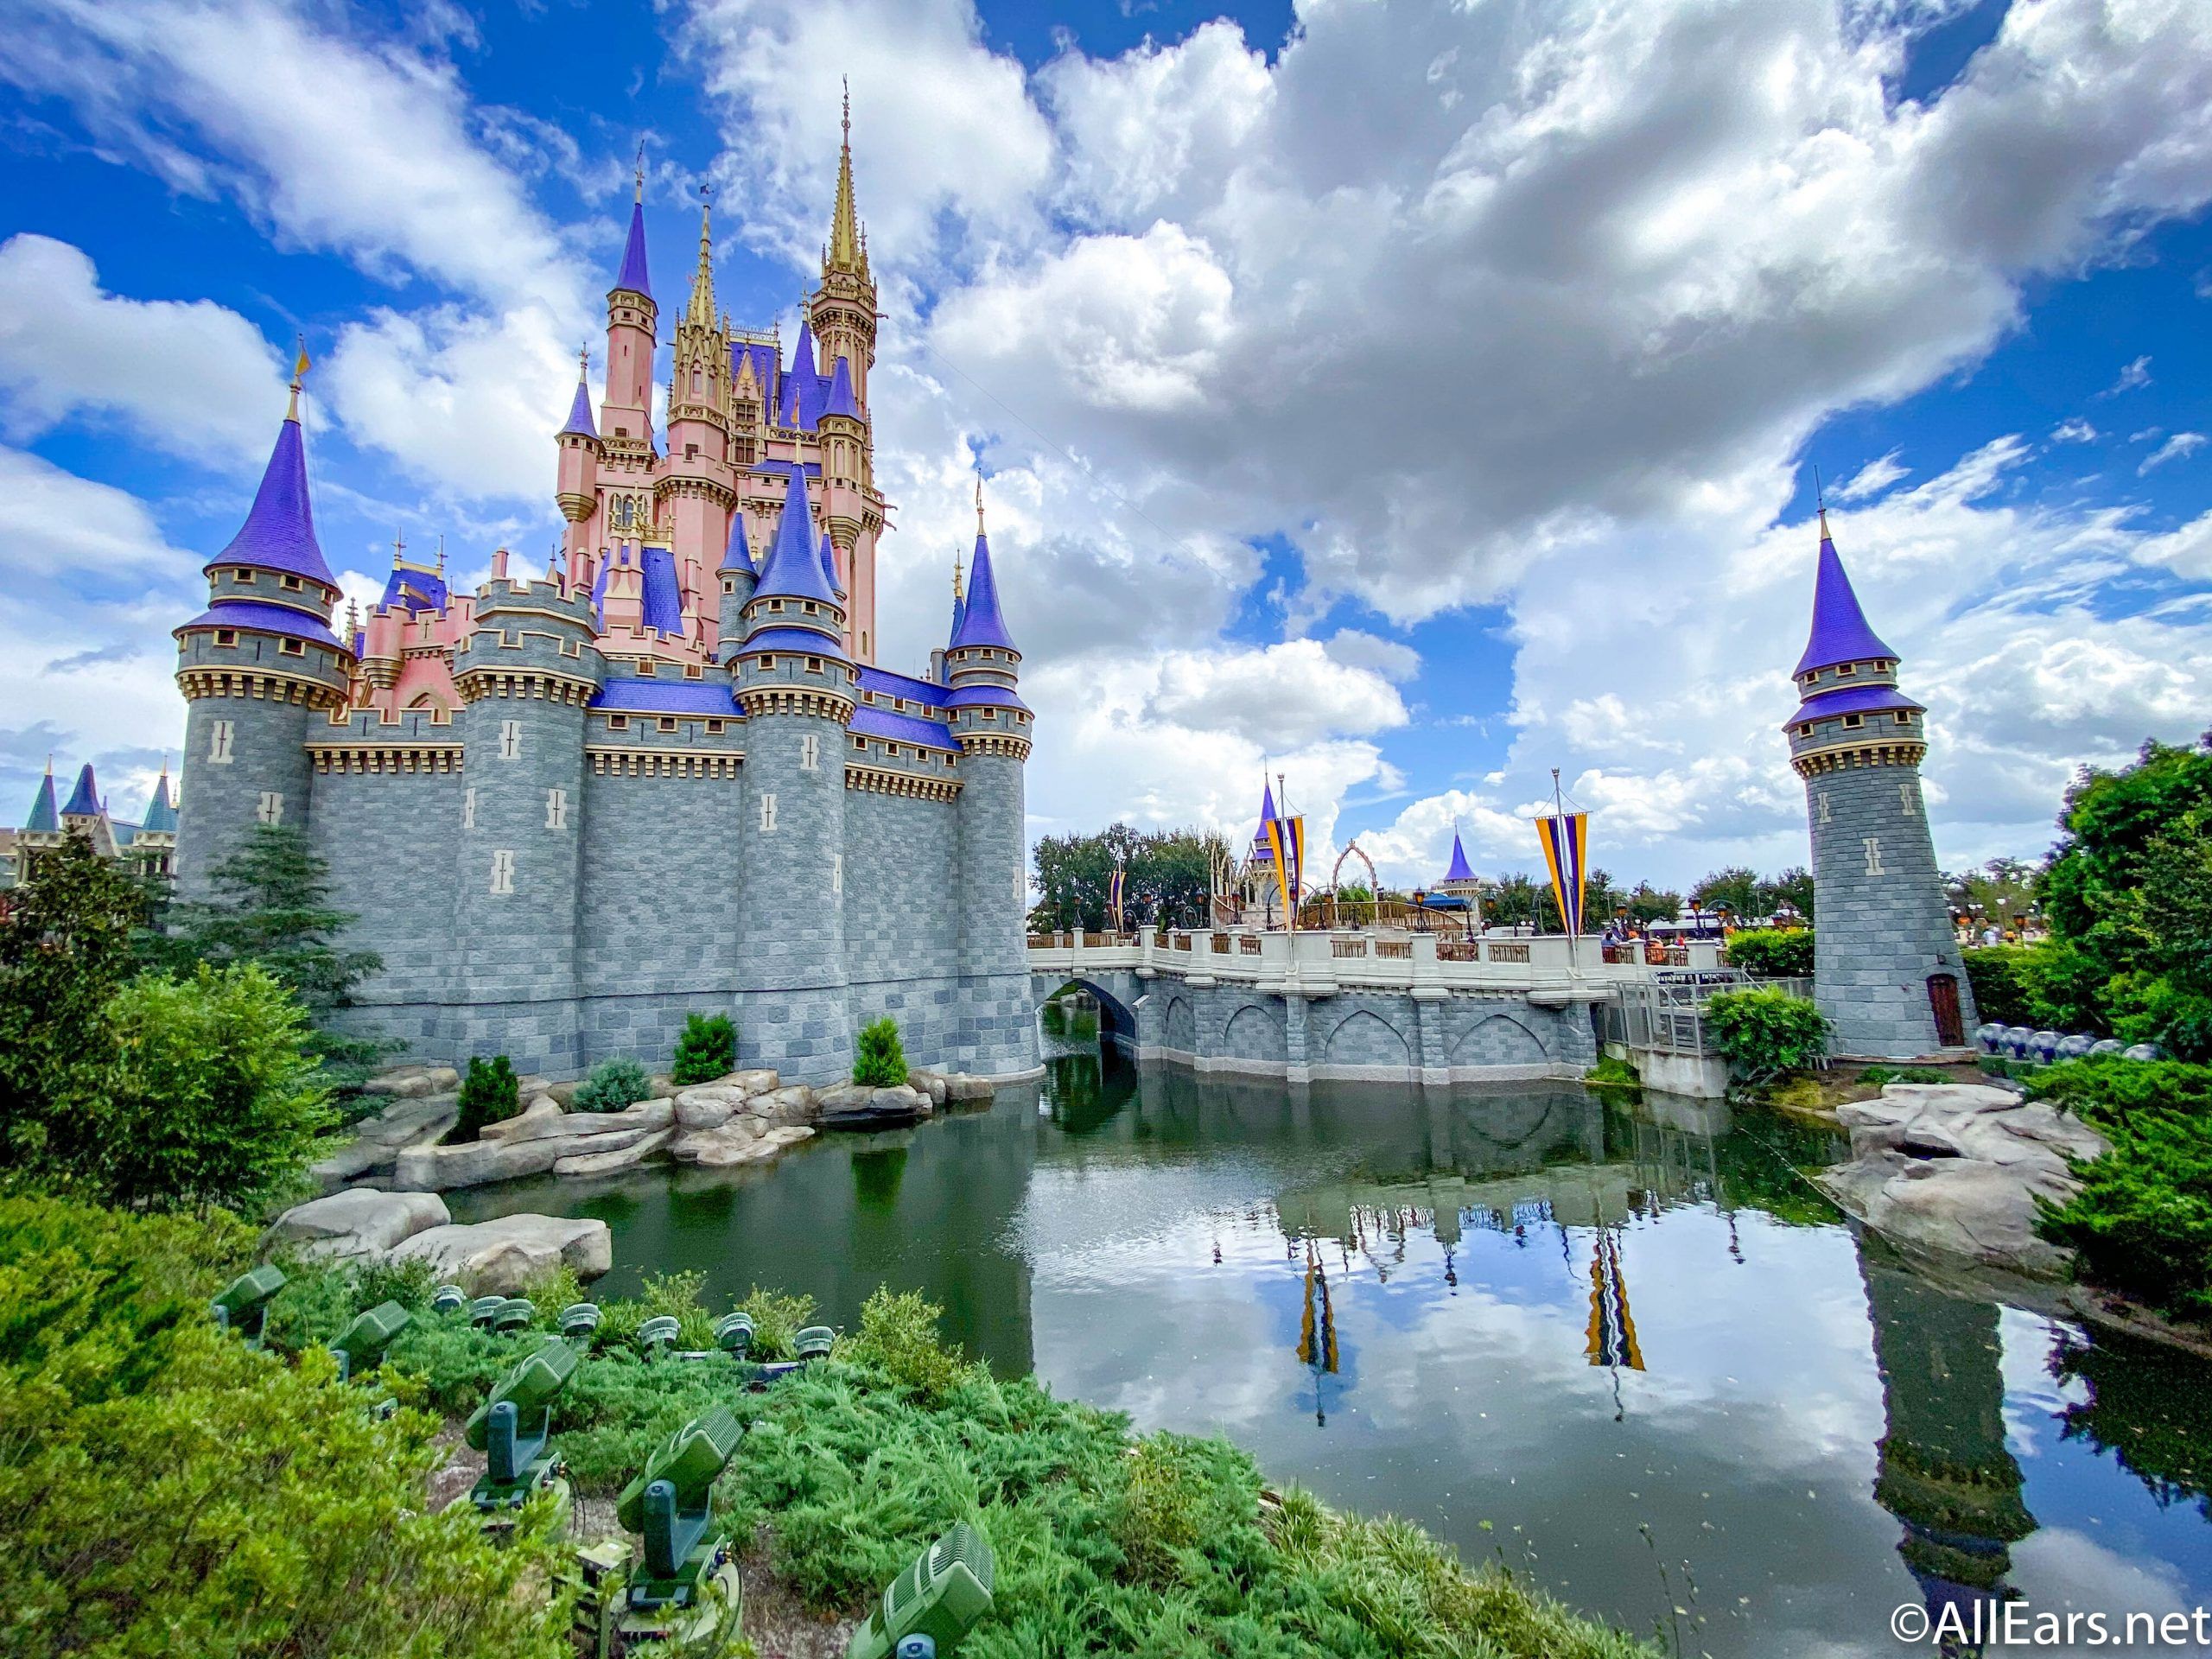 Stunning Disney World Wallpaper to Bring a Little Magic to Your Phone or Desktop